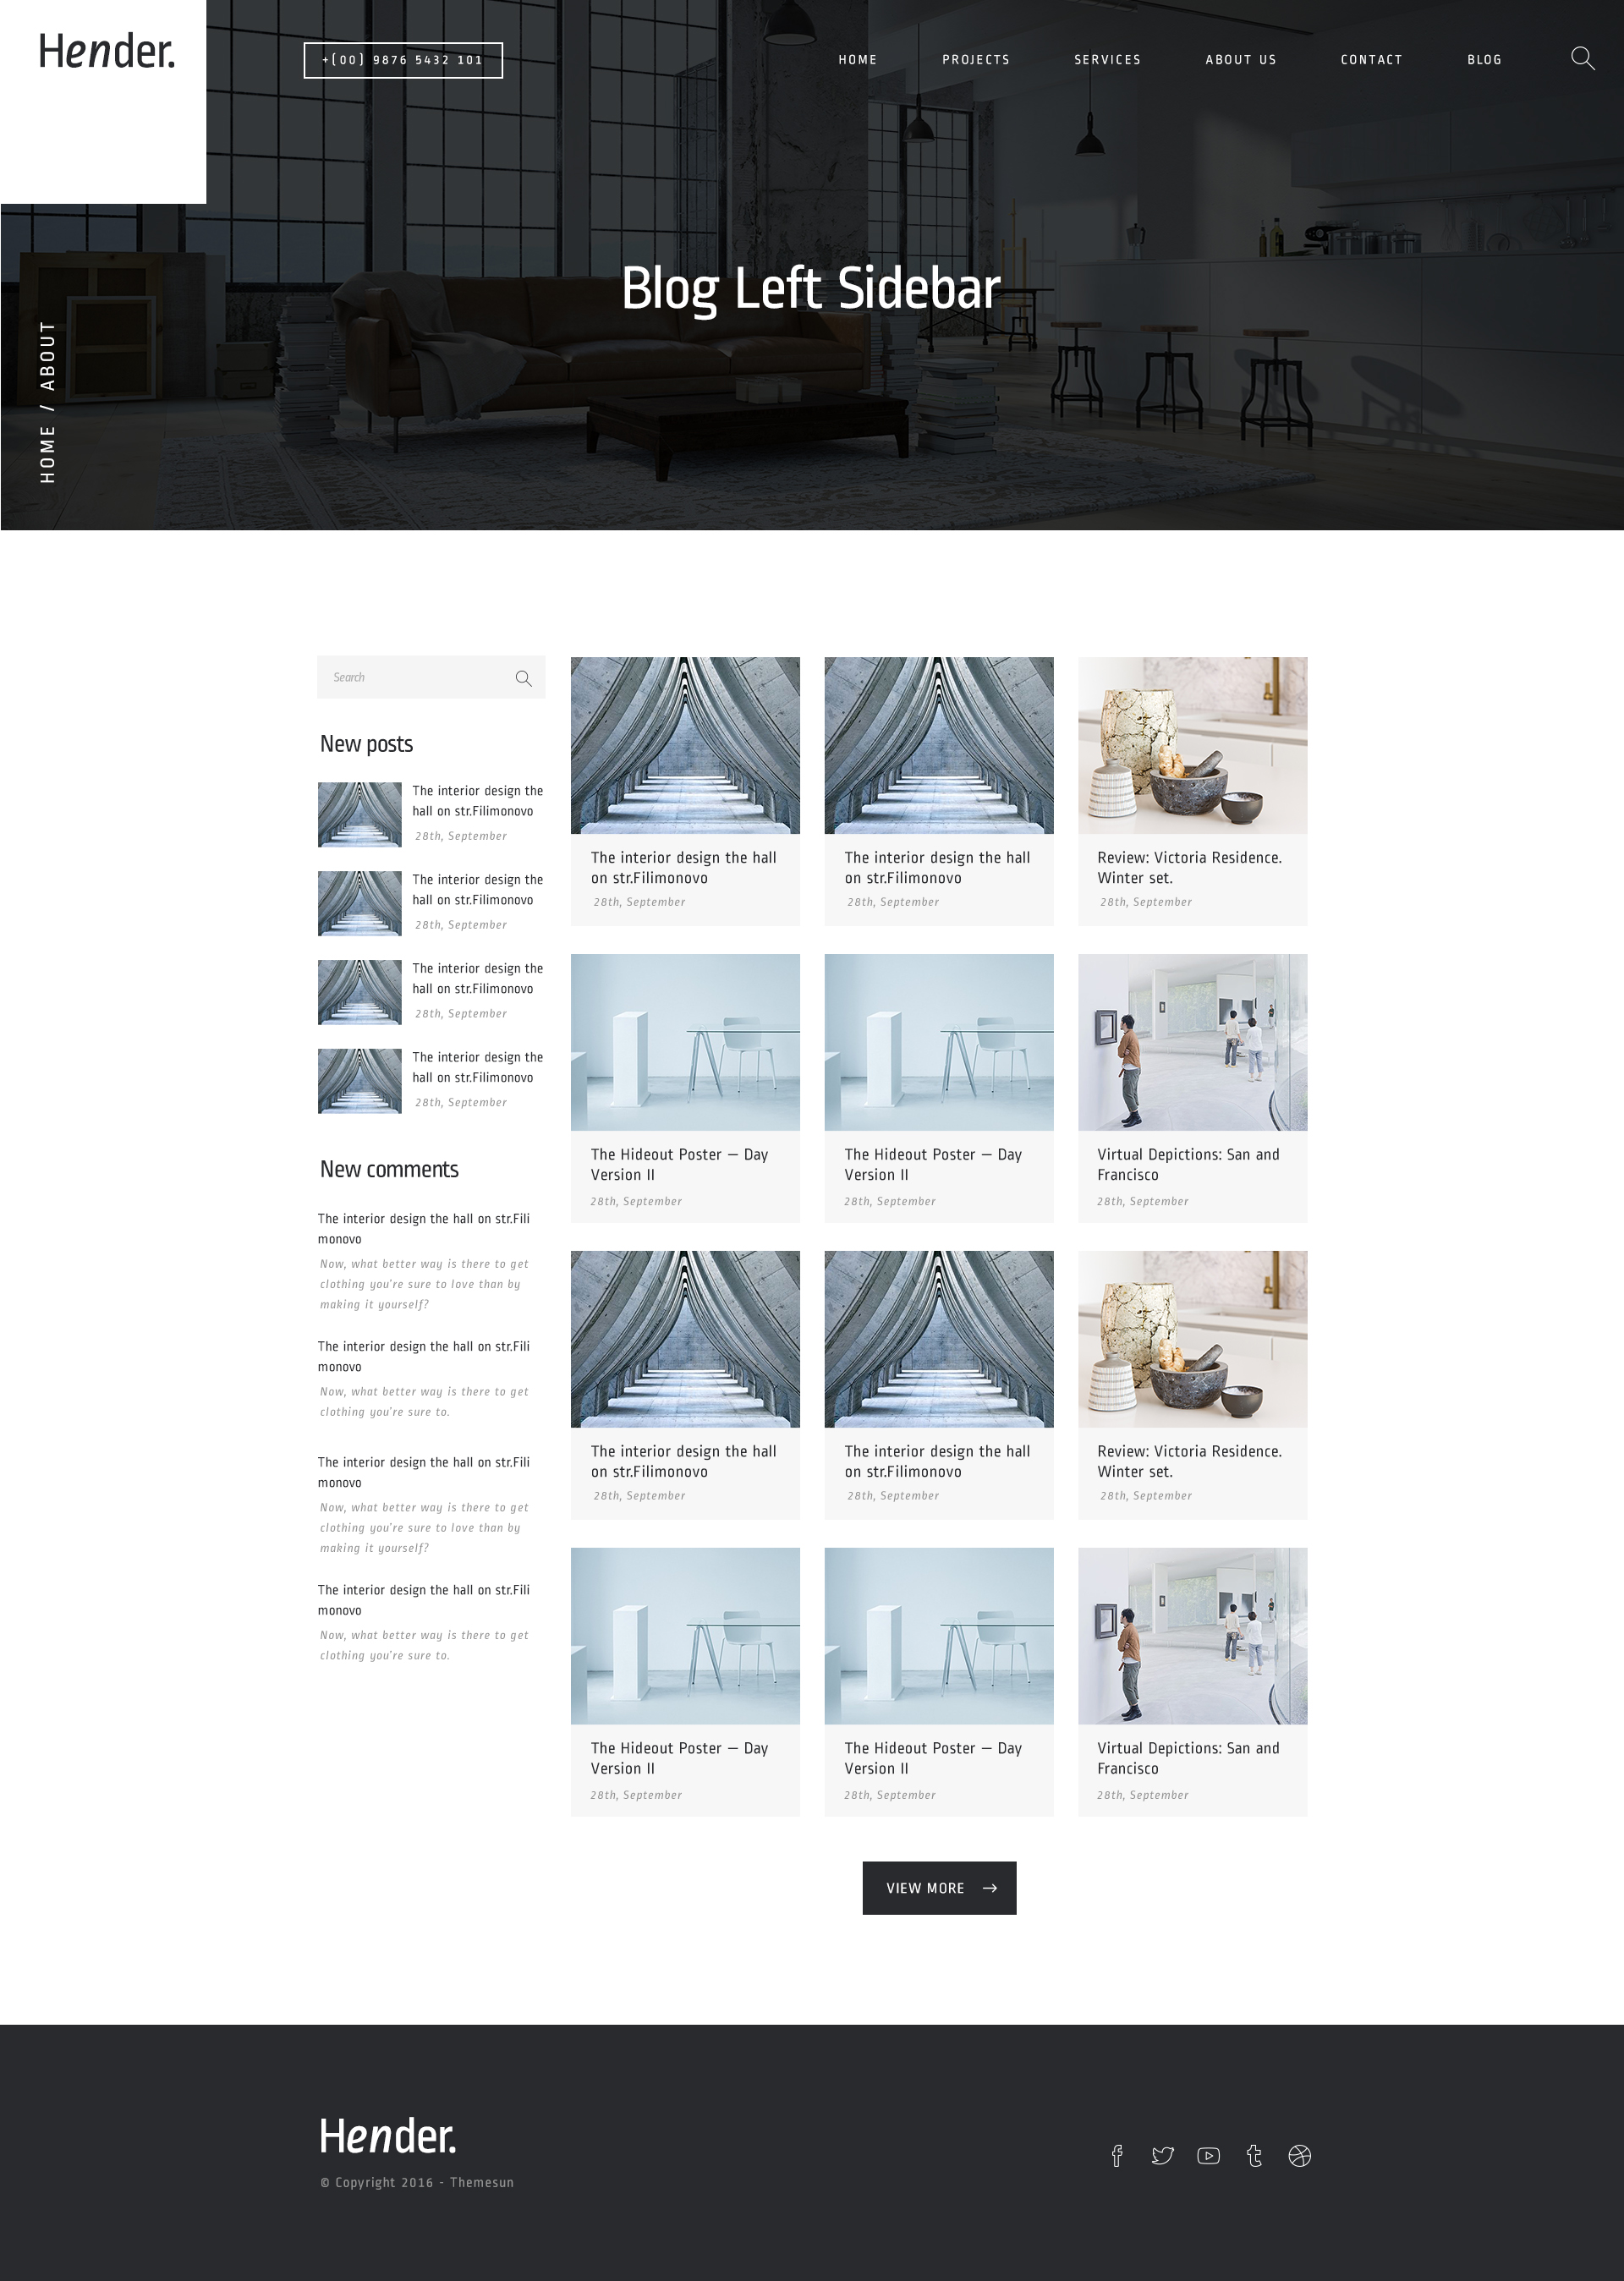 Hender - Architecture and Interior Design Agency PSD Template by ThemeSun